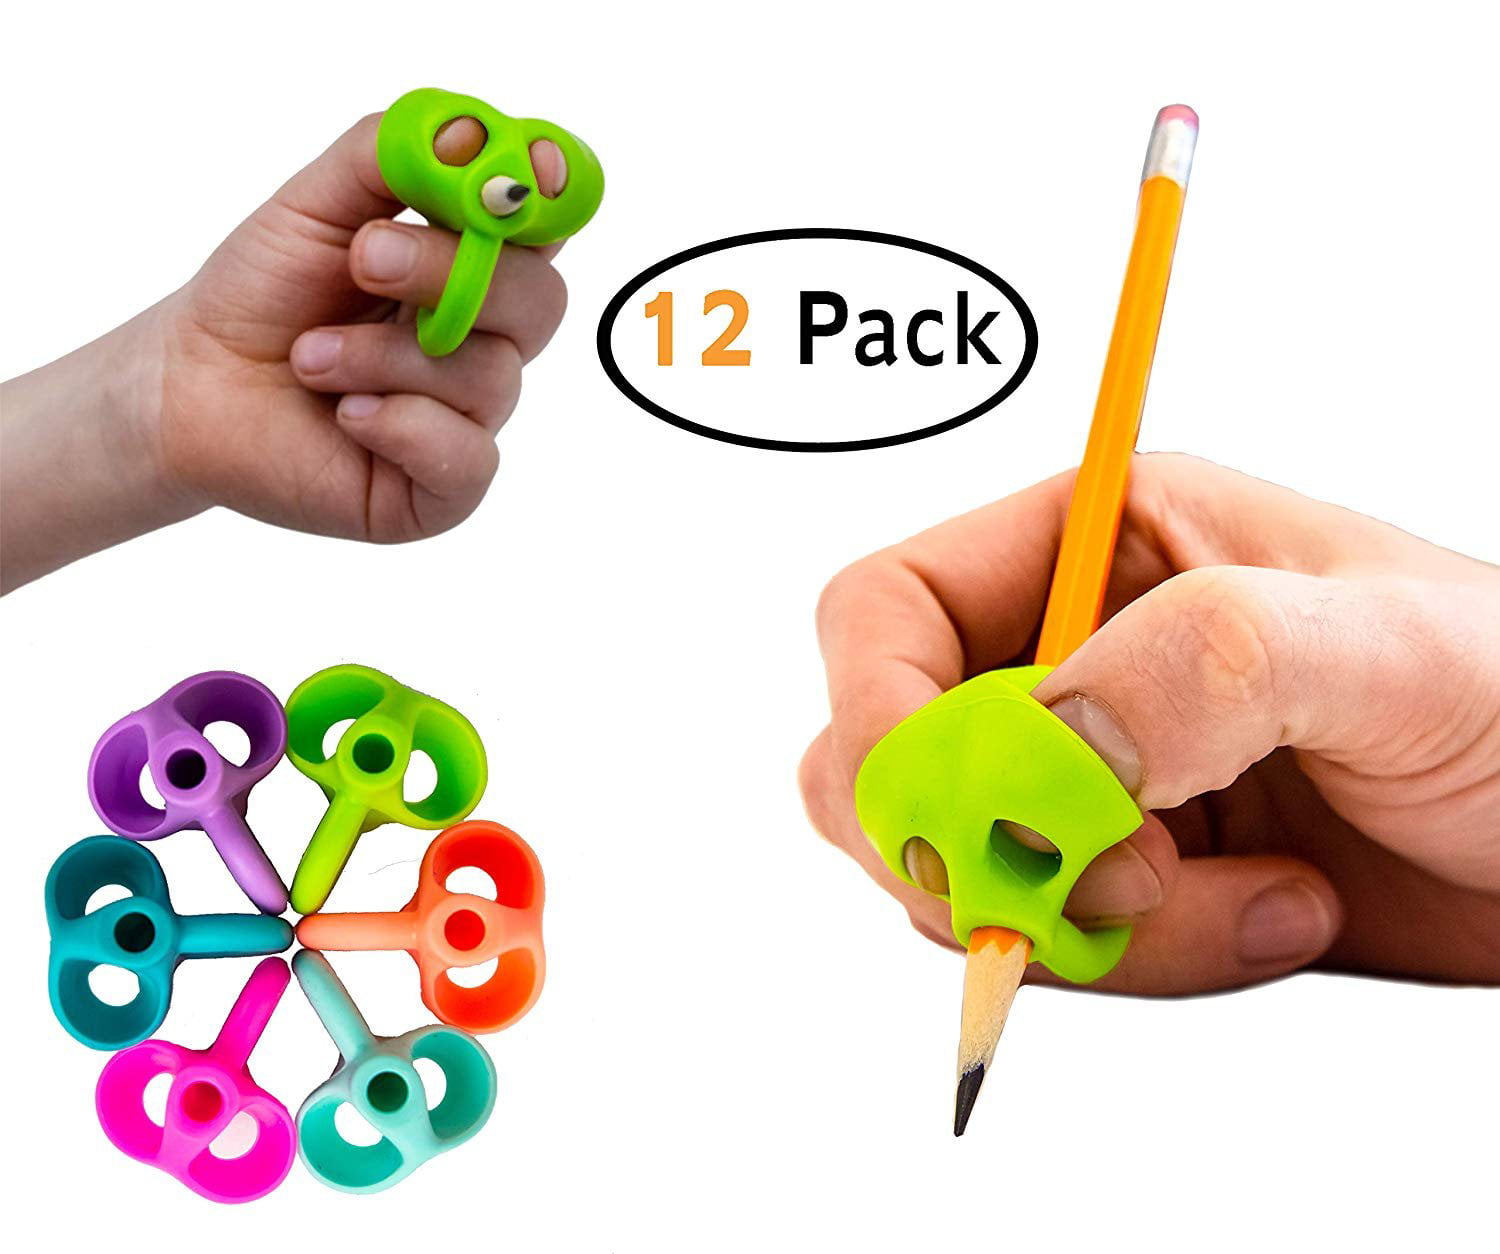 Soft Silcone Training Grip with Assorted Colors Pencil Grips for Kids Handwriting Left Handed Toddlers 2-4 Years Pack of 5 by AUTEMOJO